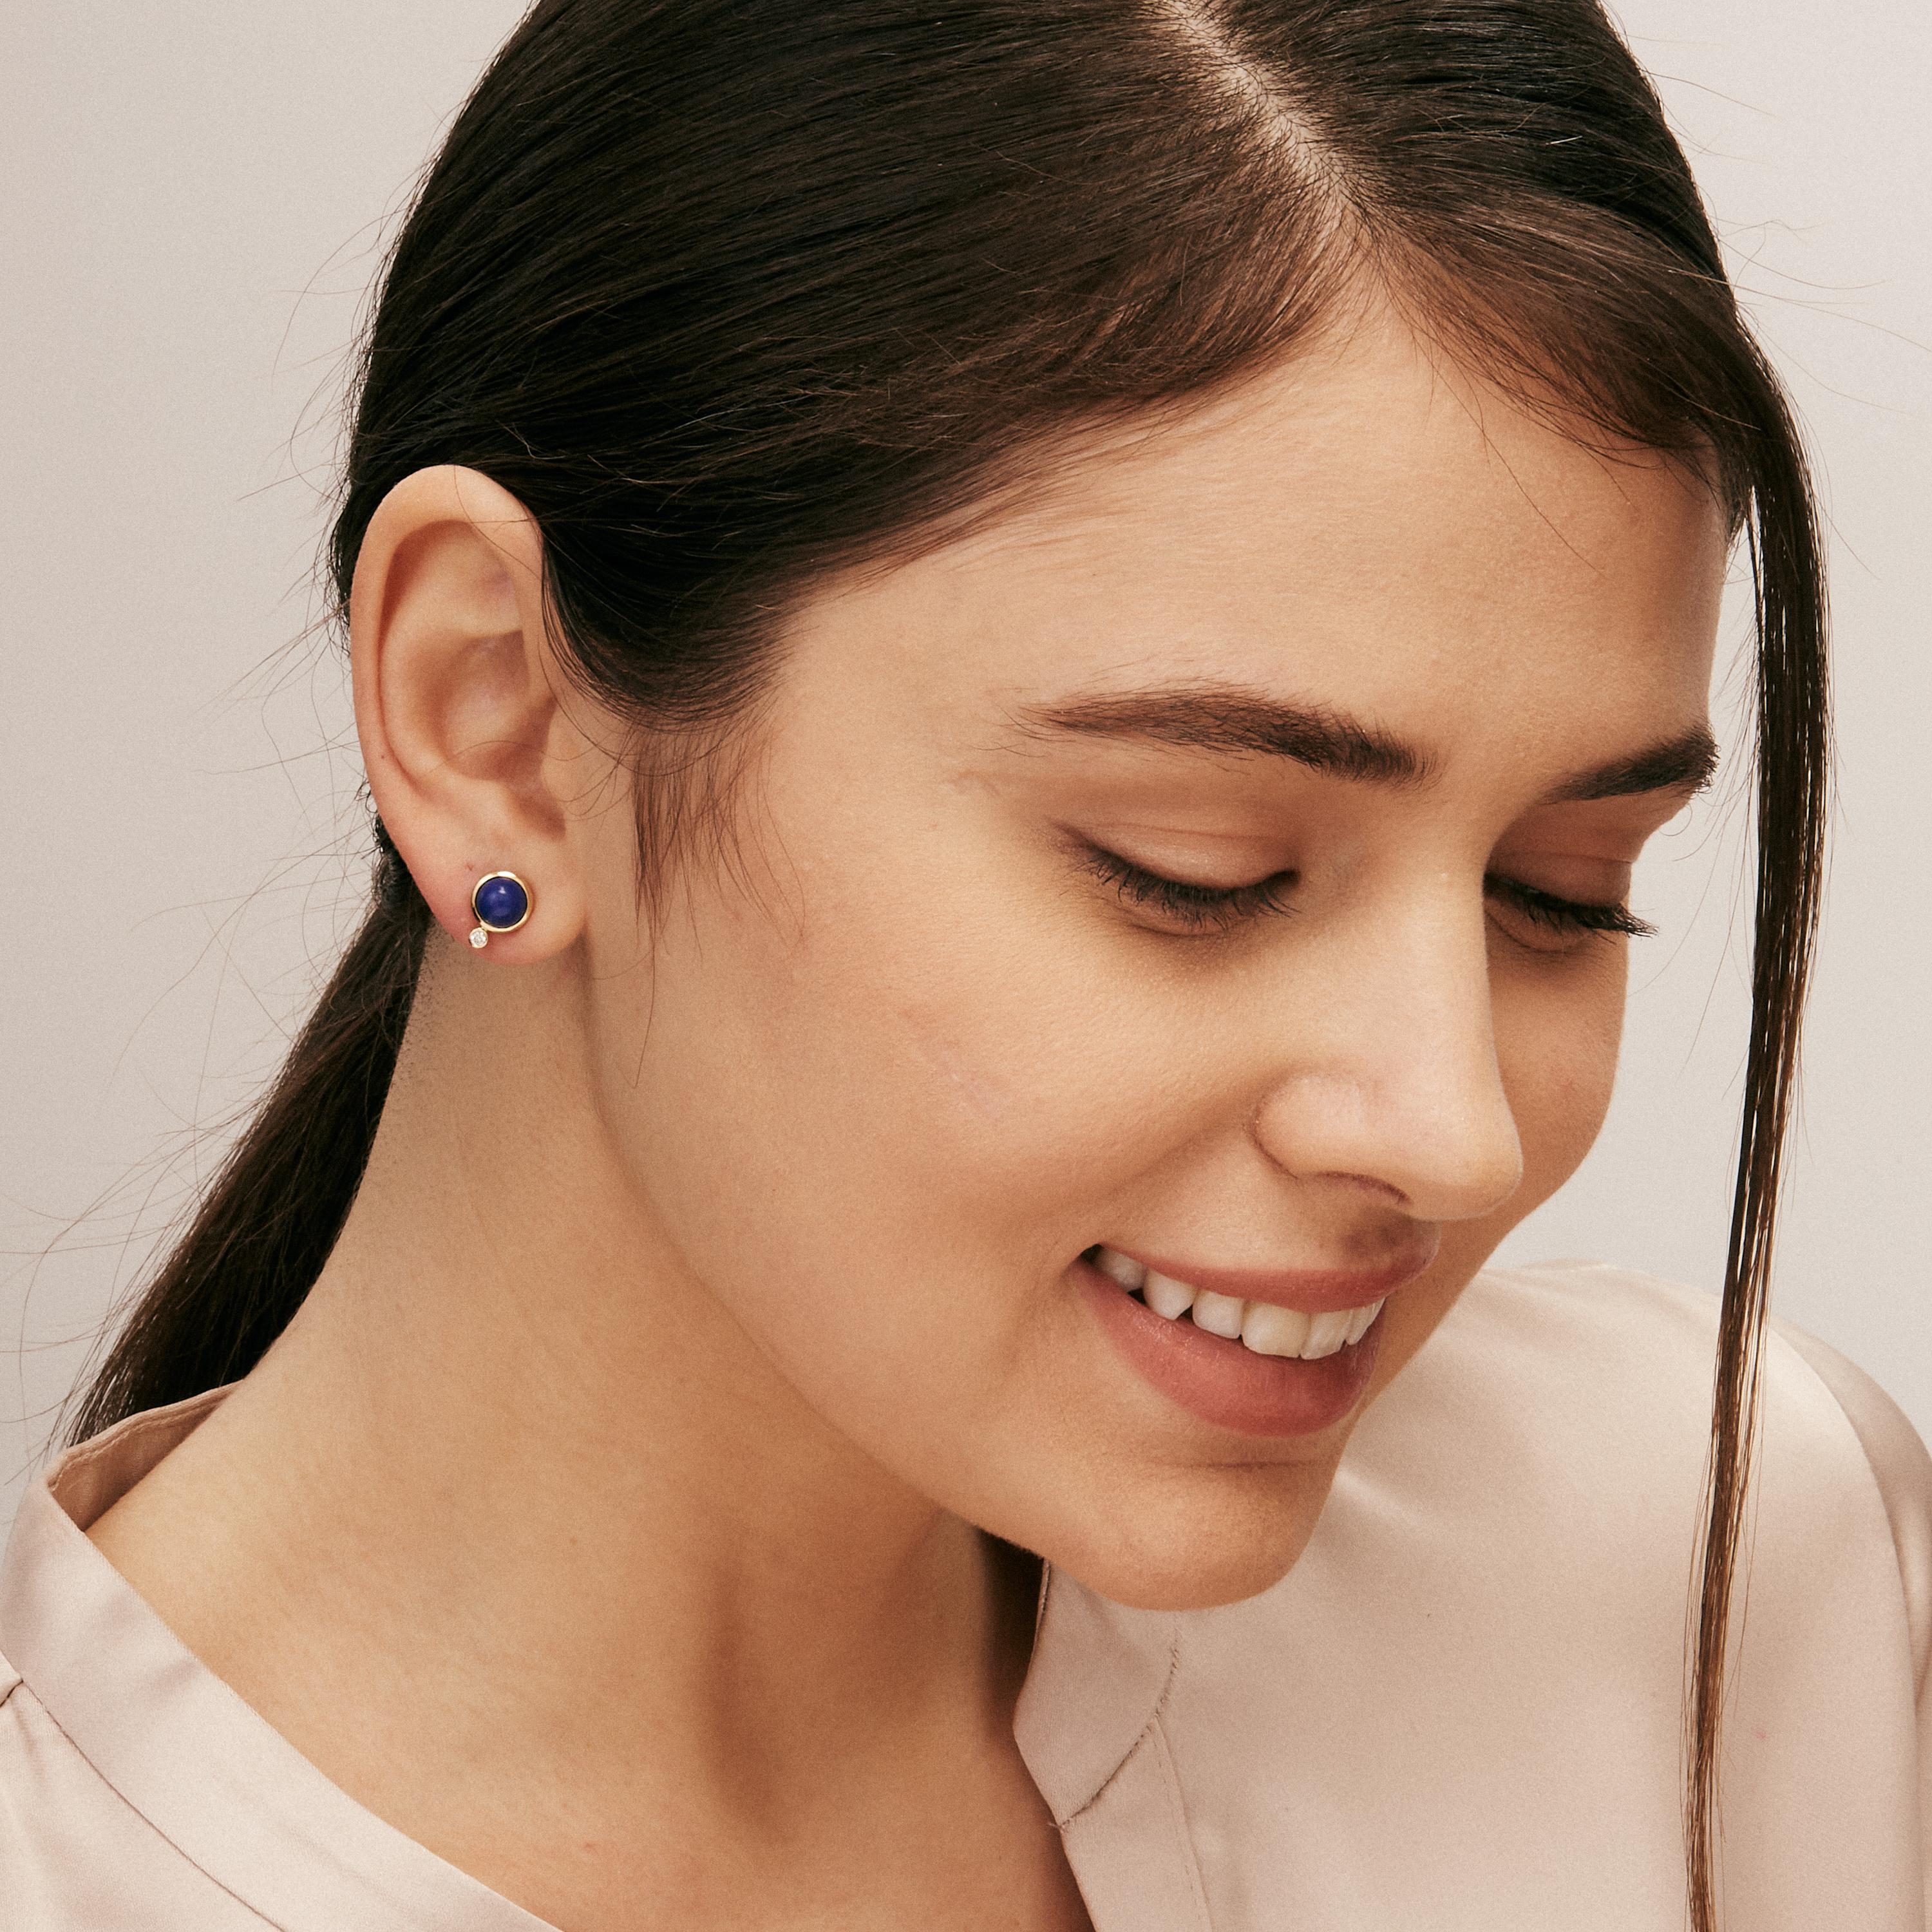 Created in 18 karat yellow gold
Lapis lazuli 2.50 carats approx.
Champagne diamonds 0.05 carat approx.
Post backs for pierced ears
Limited edition


About the Designers ~ Dharmesh & Namrata

Drawing inspiration from little things, Dharmesh & Namrata